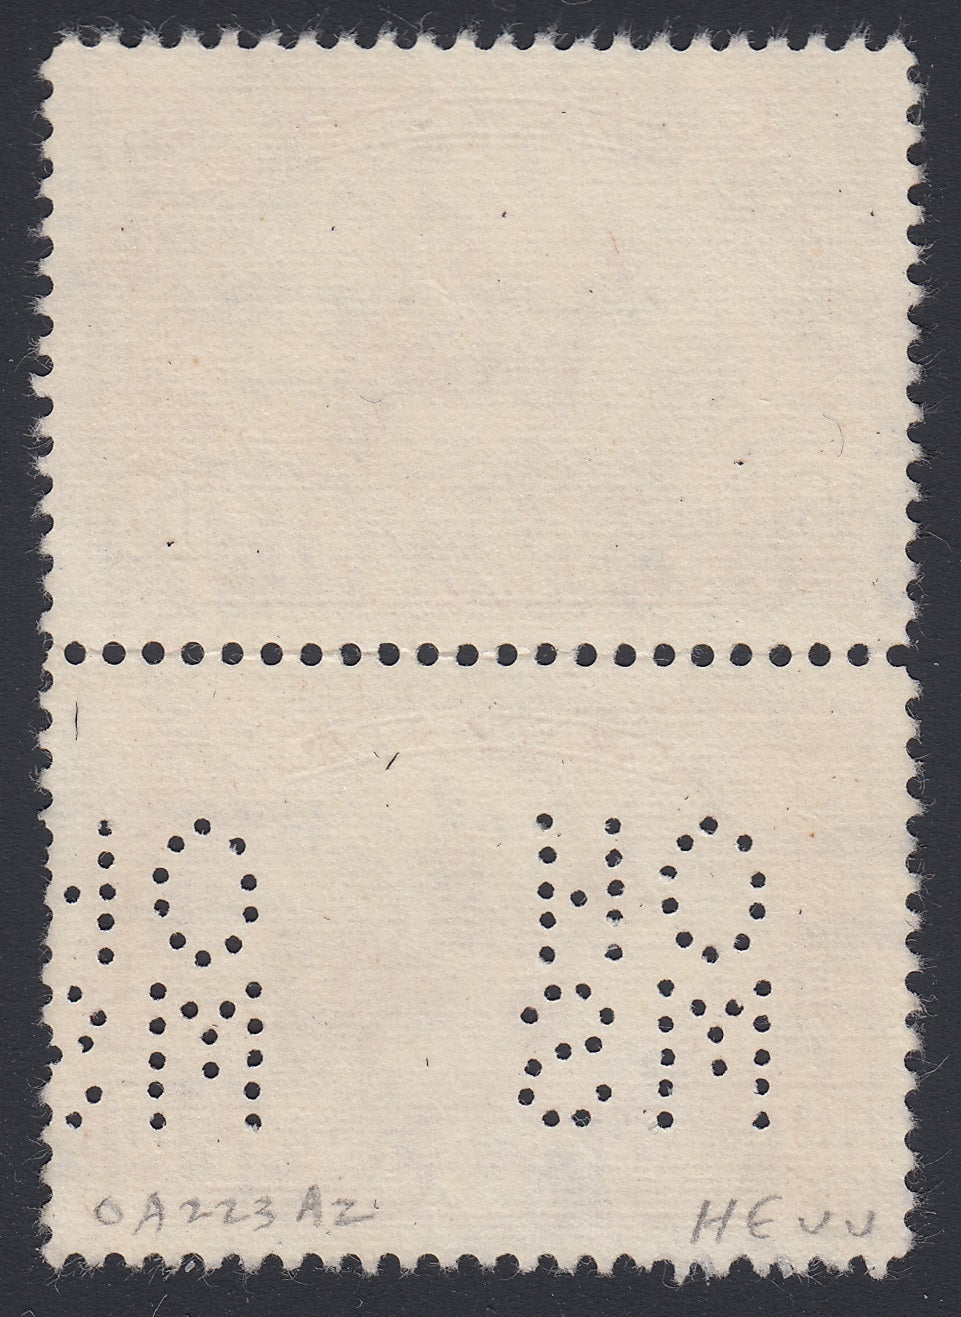 0253CA1804 - Canada OA223 &#39;A Z&#39; - Used Vertical Pair